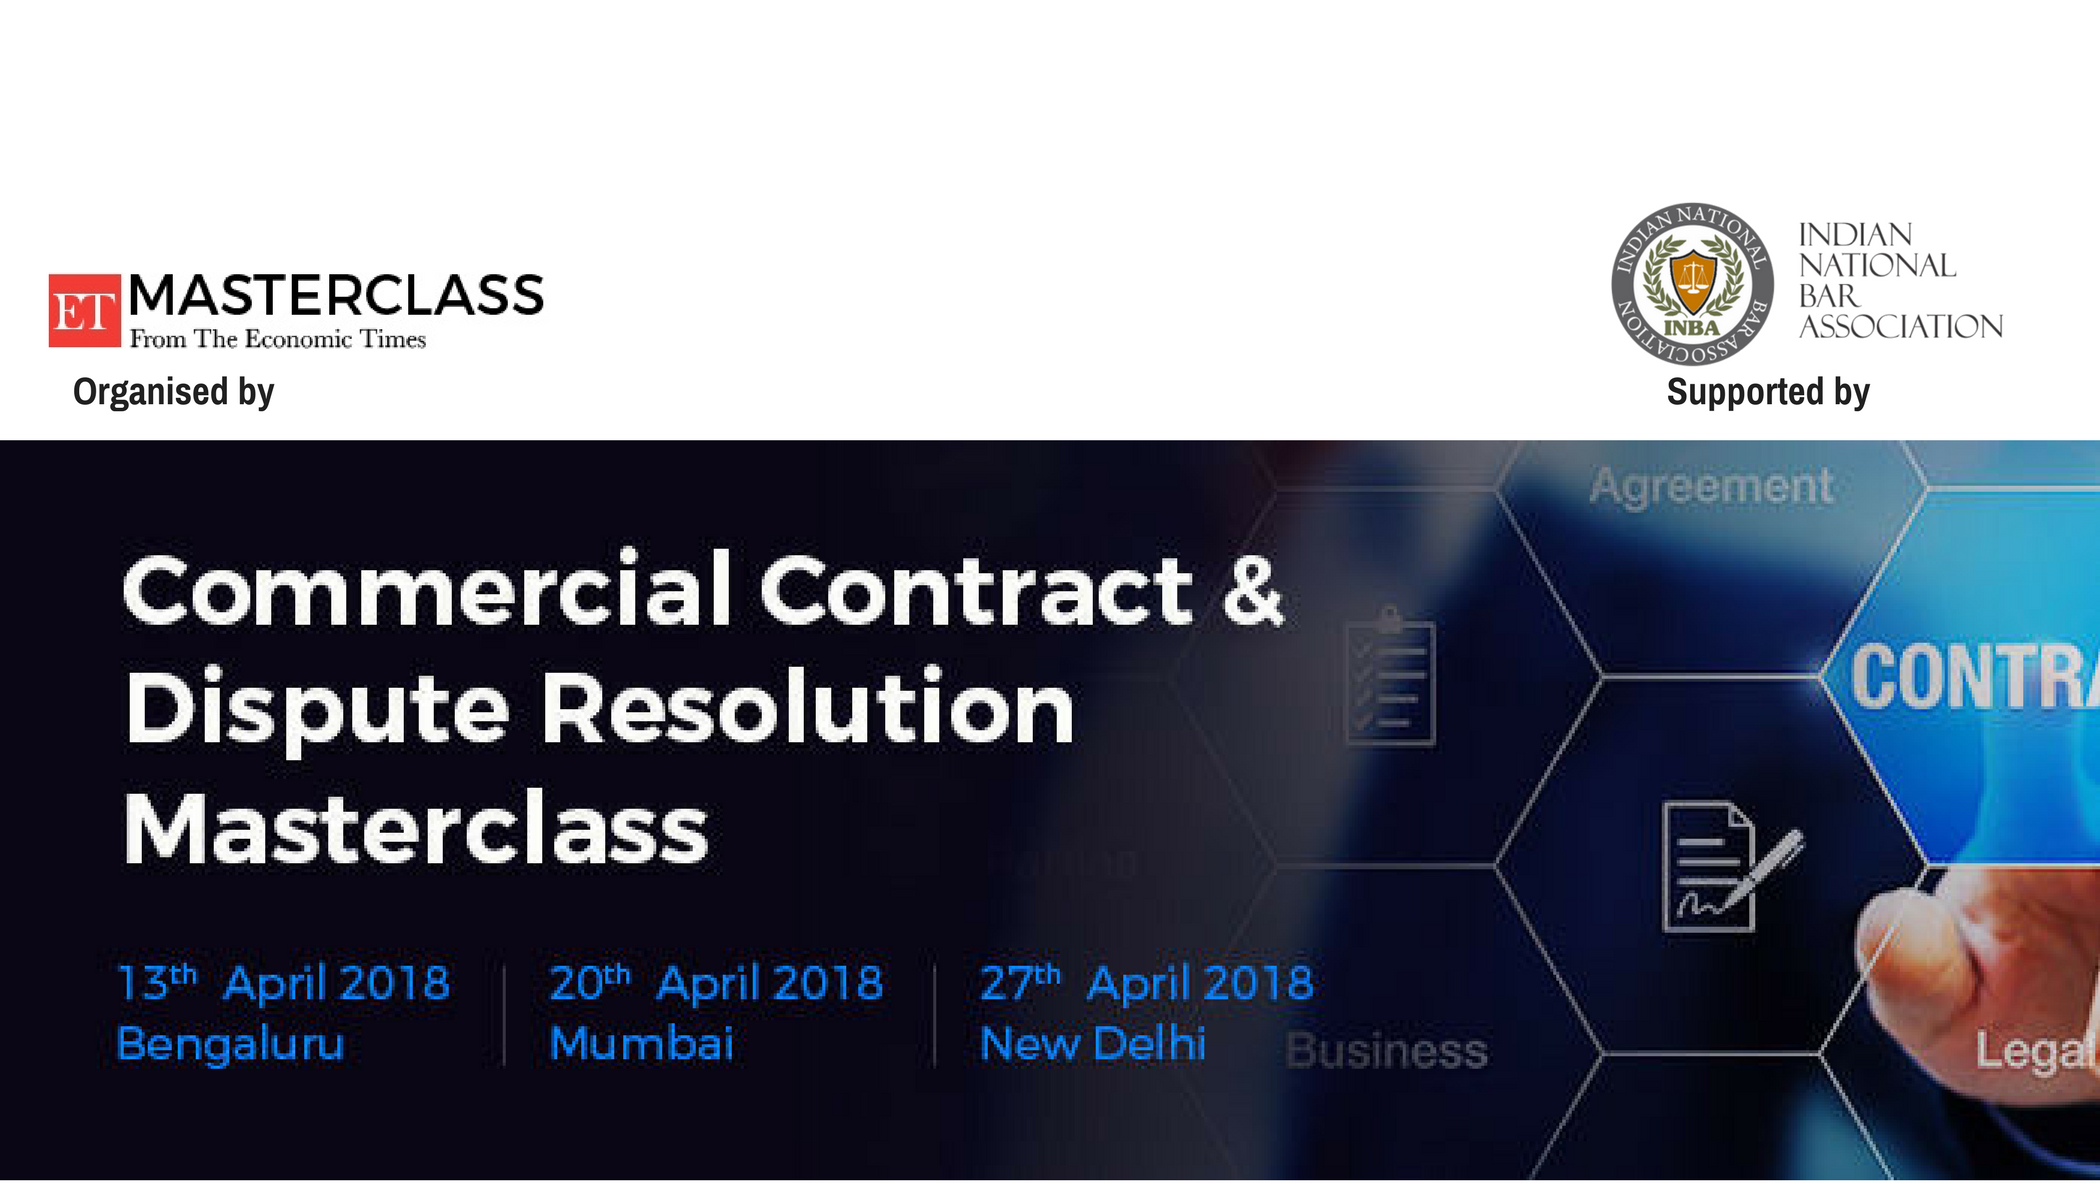 INBA is happy to support ET Masterclass for the upcoming workshop on 'Commercial Contract & Dispute Resolution'